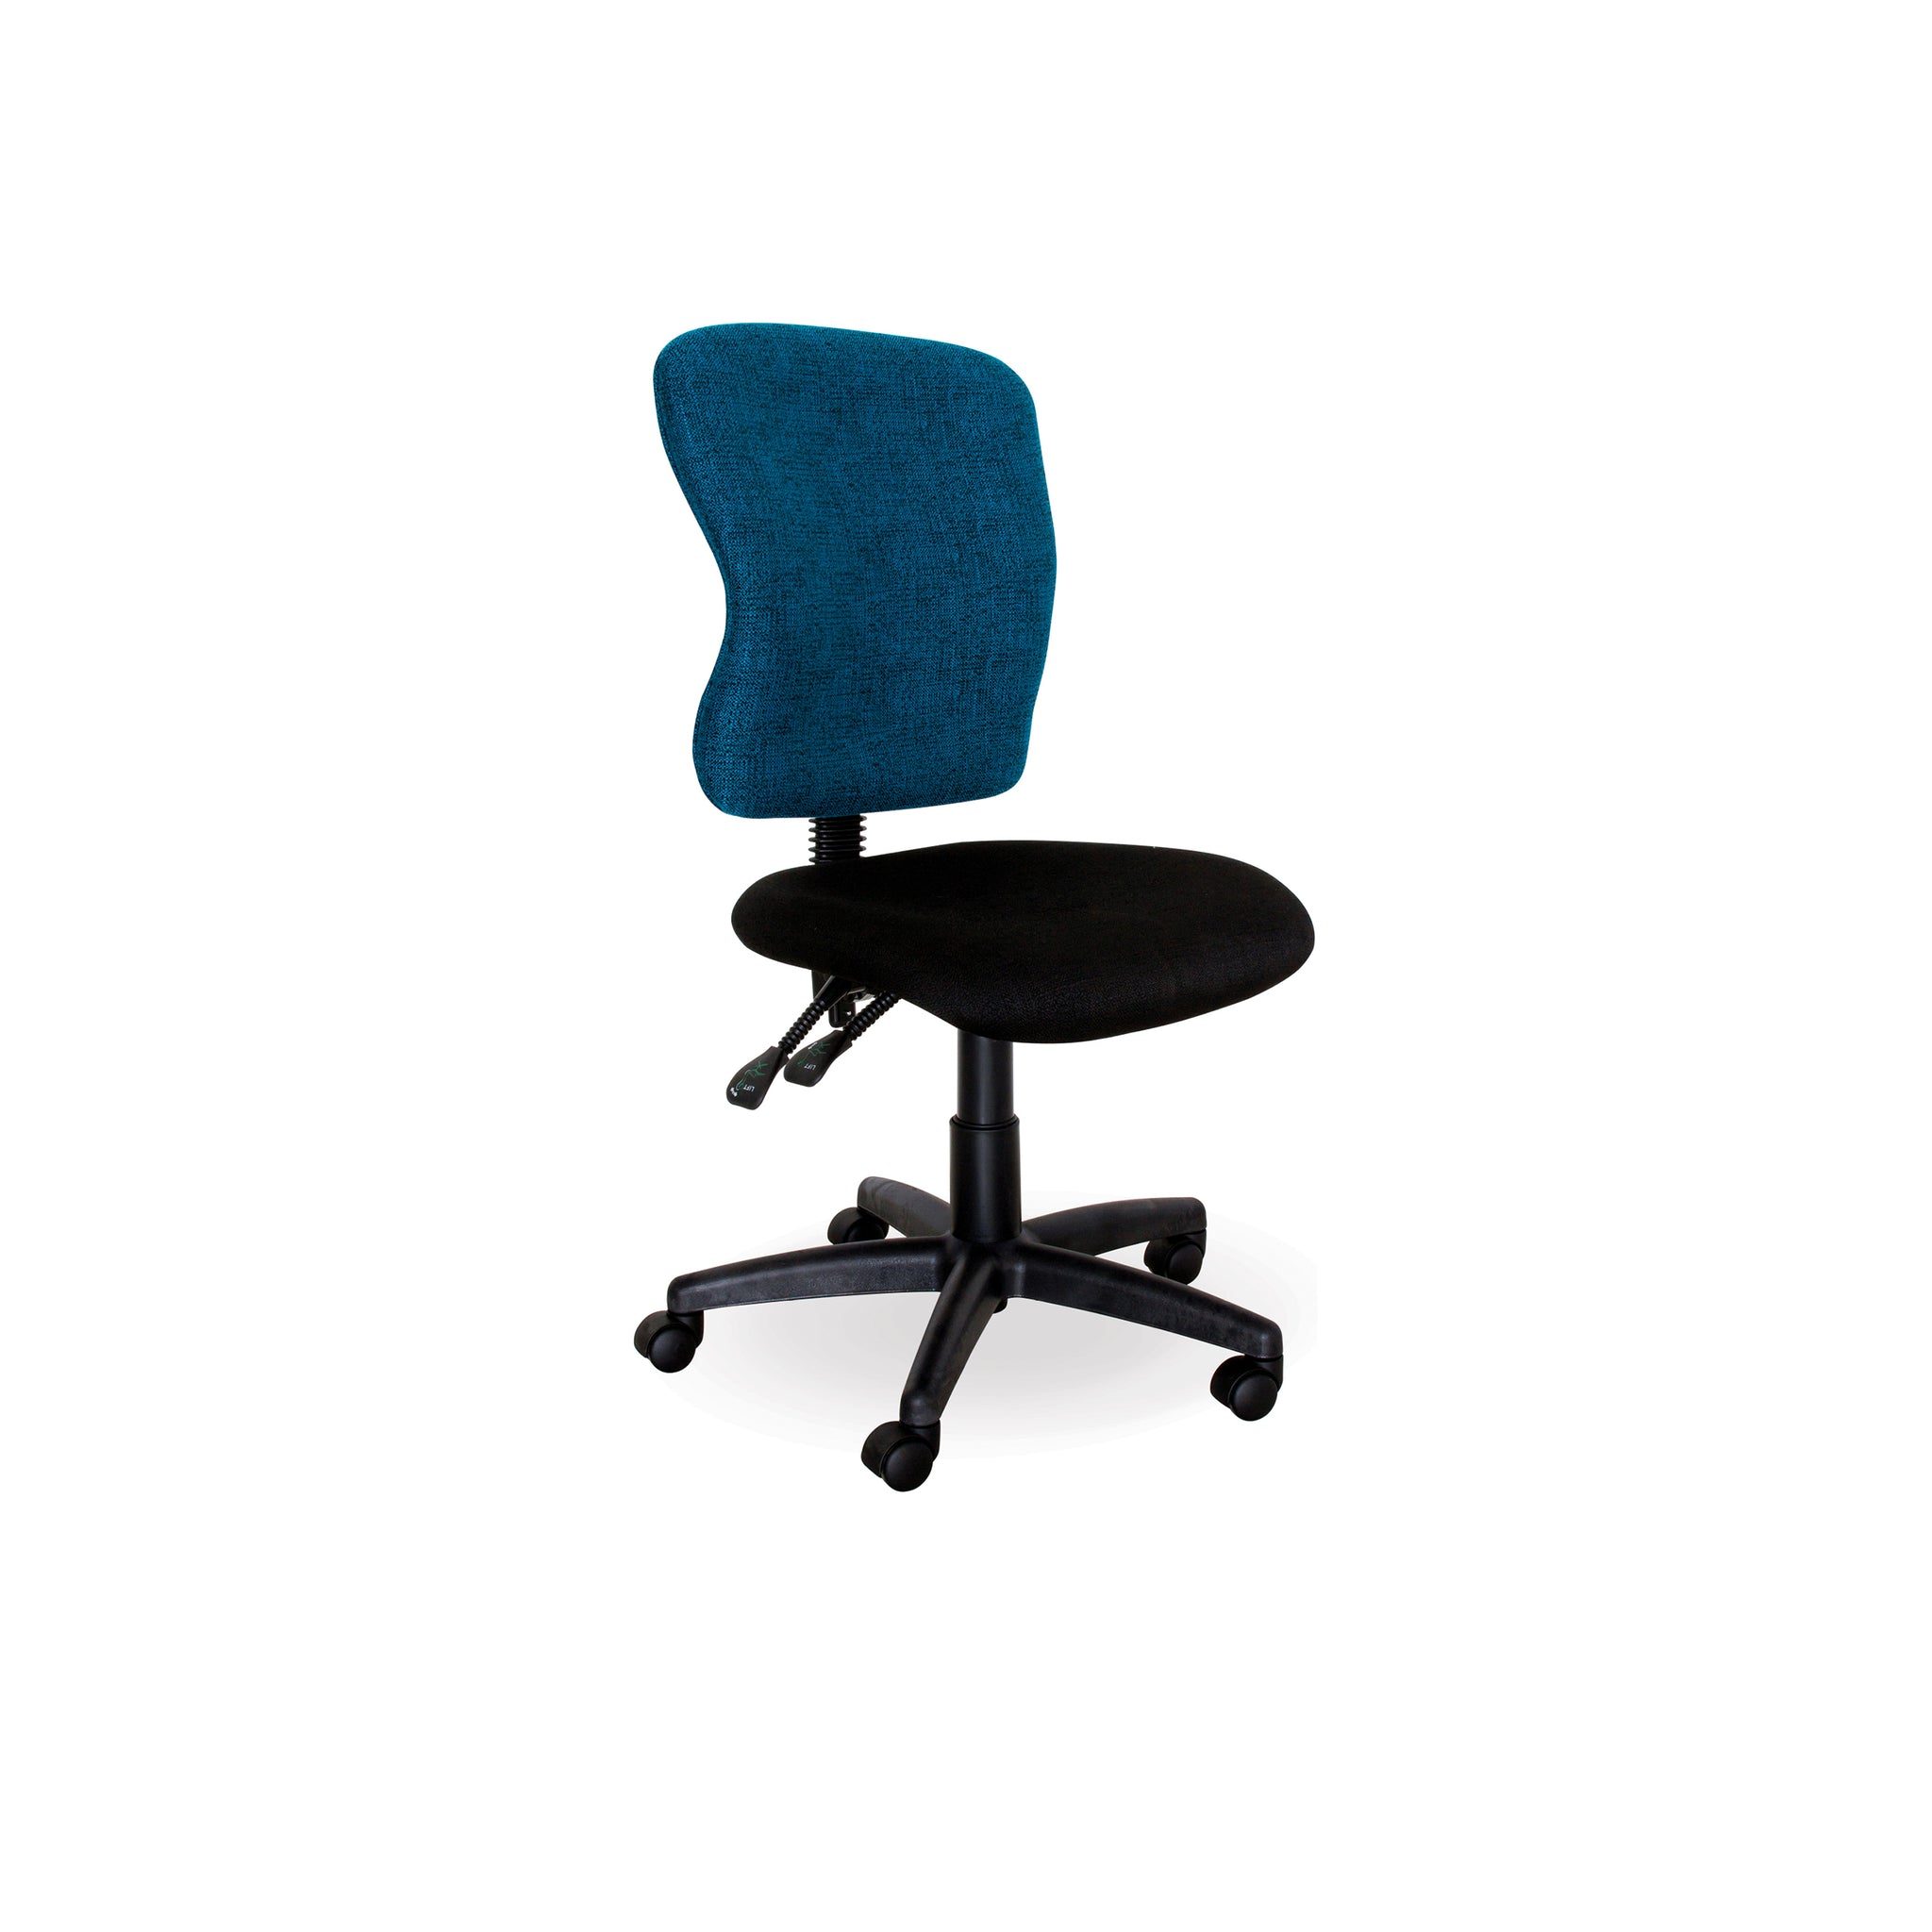 Hedcor Lucea office chair